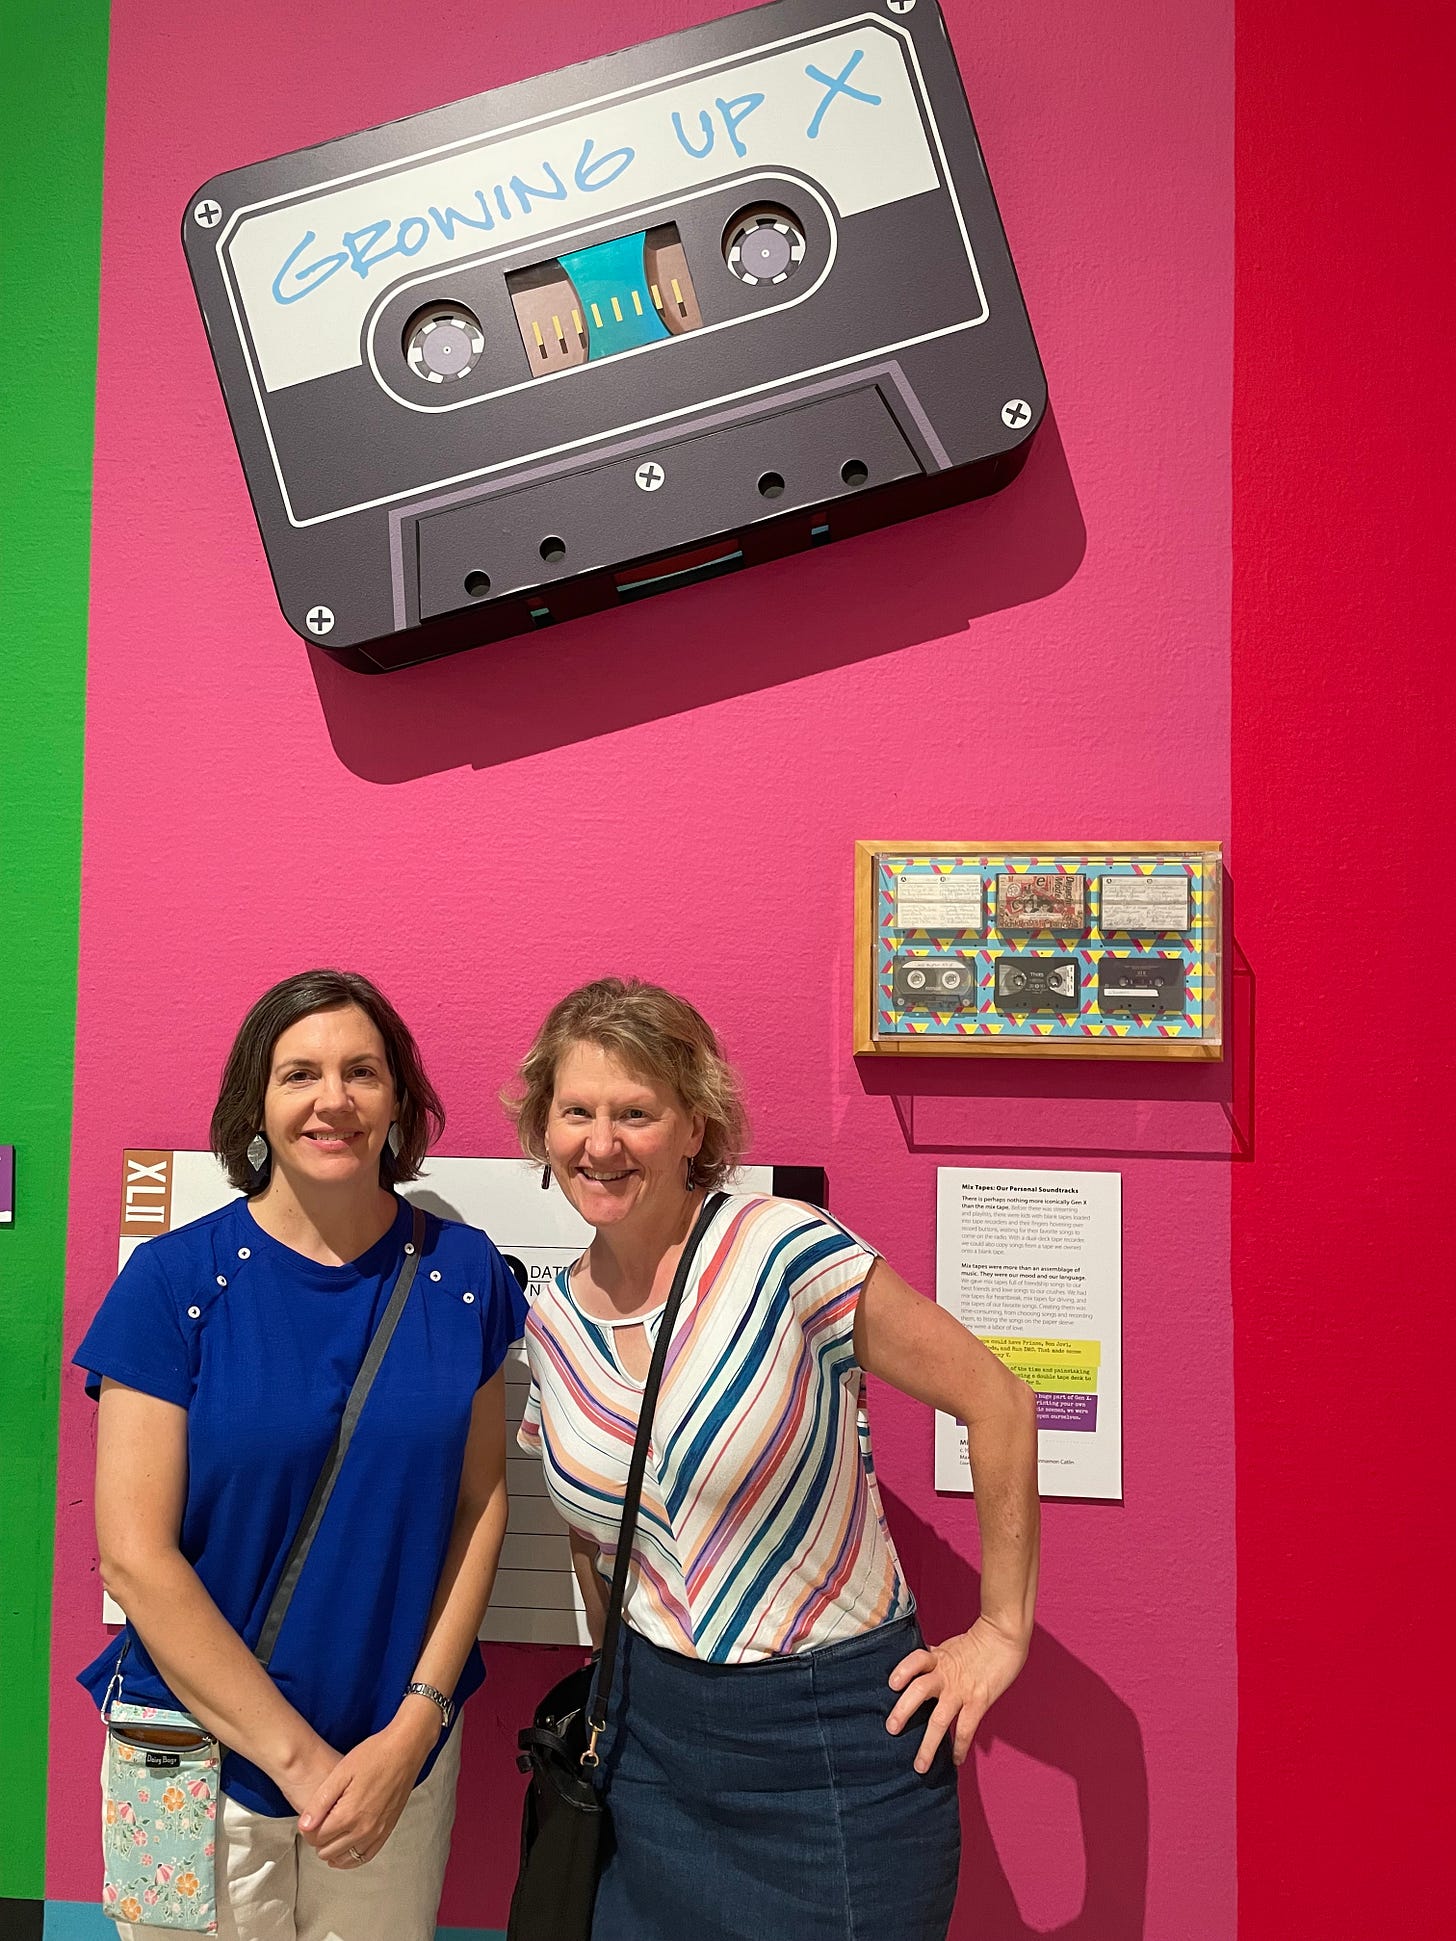 photo of two sisters standing in front of a large image of a cassette tape